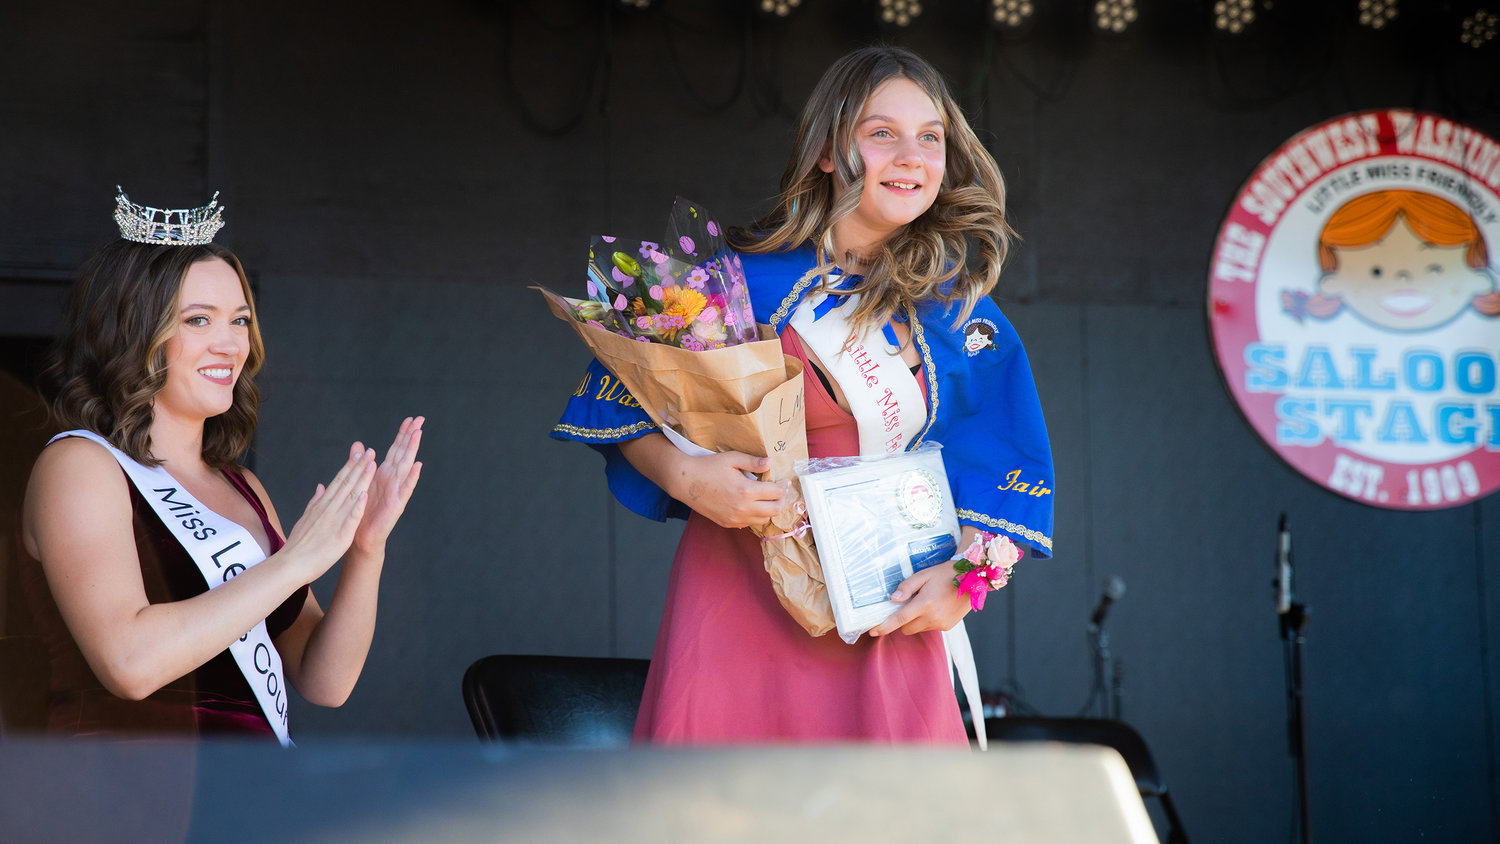 MaKayla Maynard smiles after being presented with a plaque and flowers Tuesday afternoon on the Saloon Stage at the Southwest Washington Fairgrounds in Centralia.